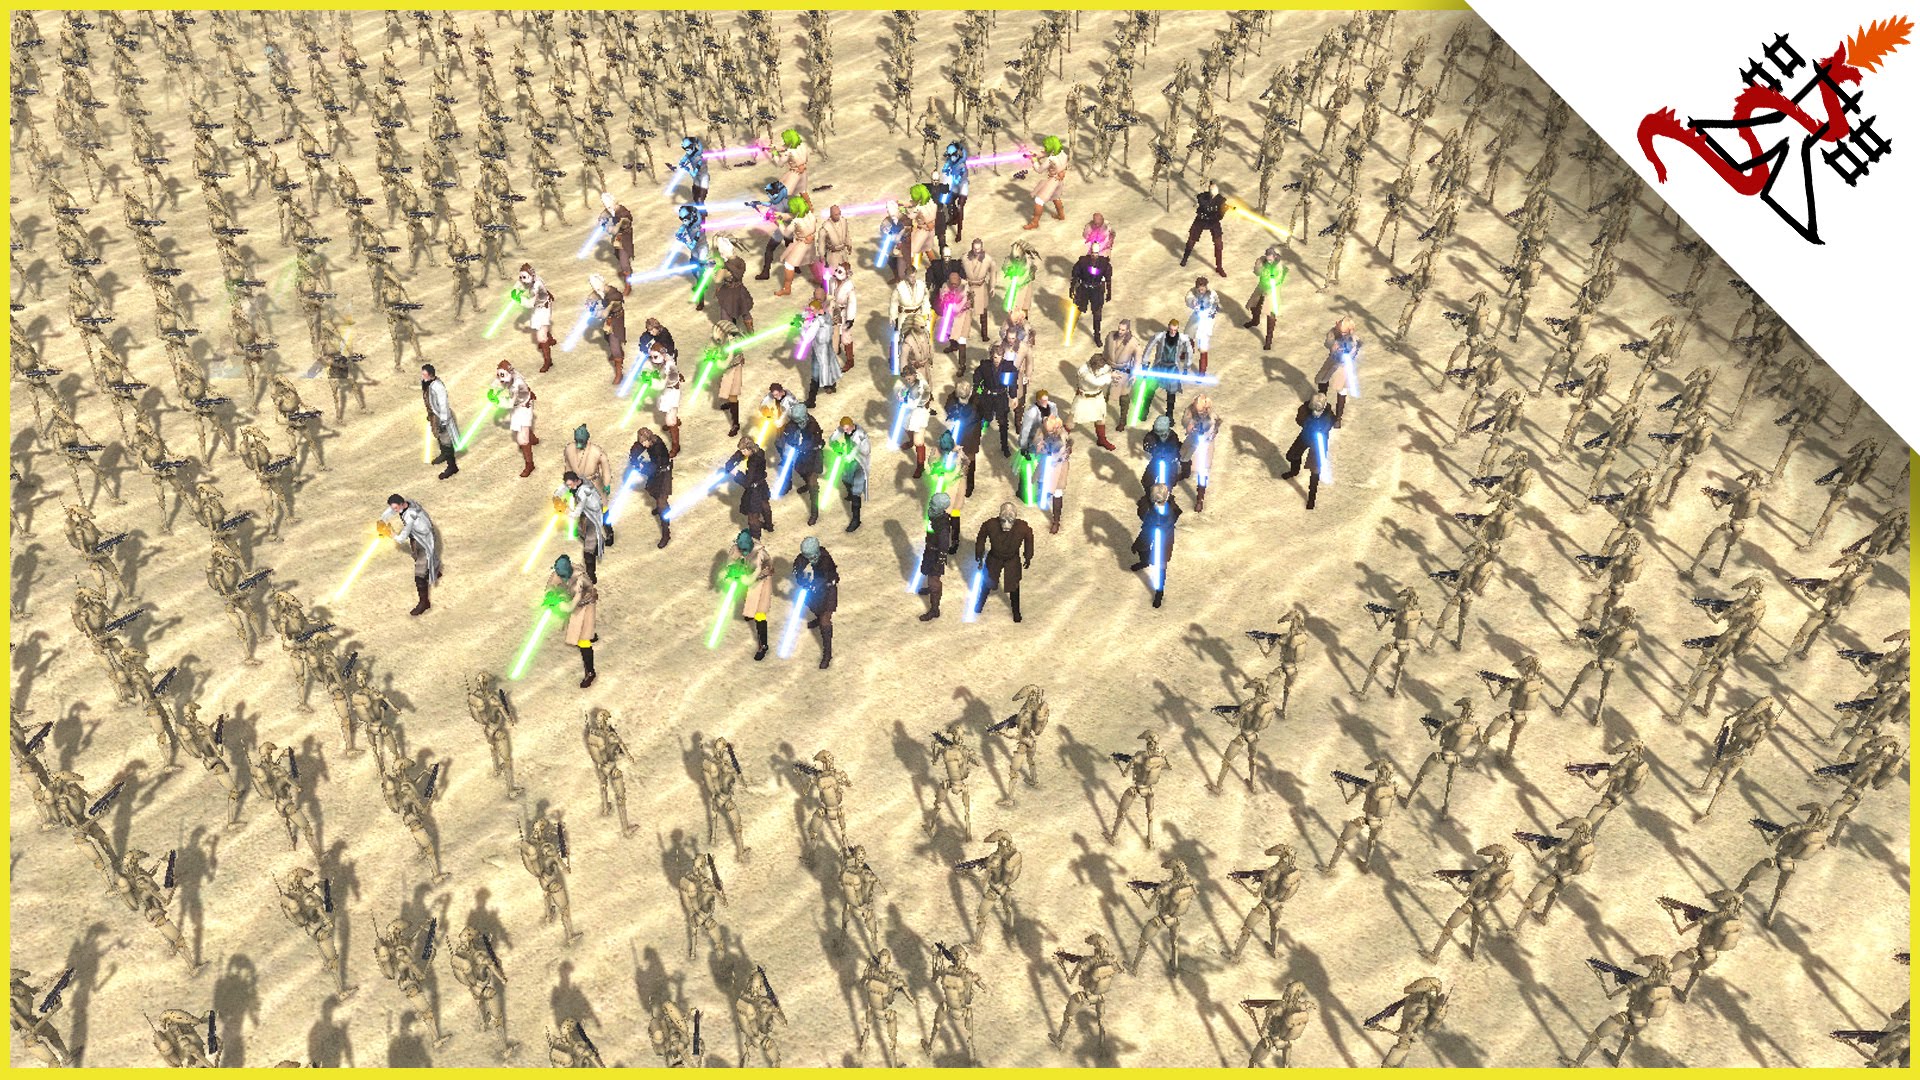 JEDIs SURROUNDED BY DROIDS - Star Wars Galaxy at War MOD - YouTube